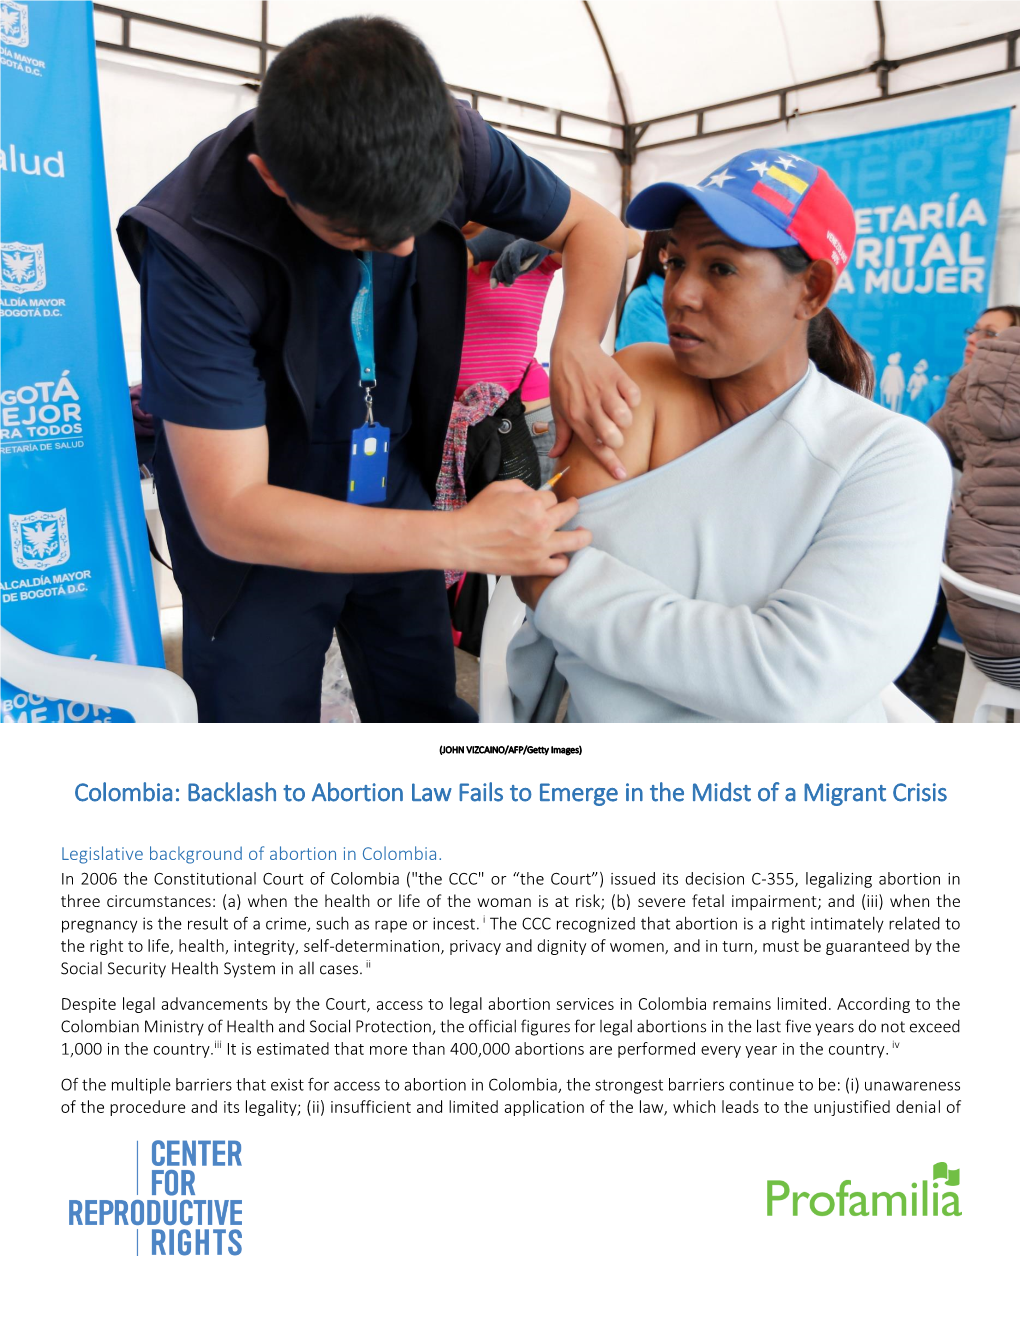 Colombia: Backlash to Abortion Law Fails to Emerge in the Midst of a Migrant Crisis